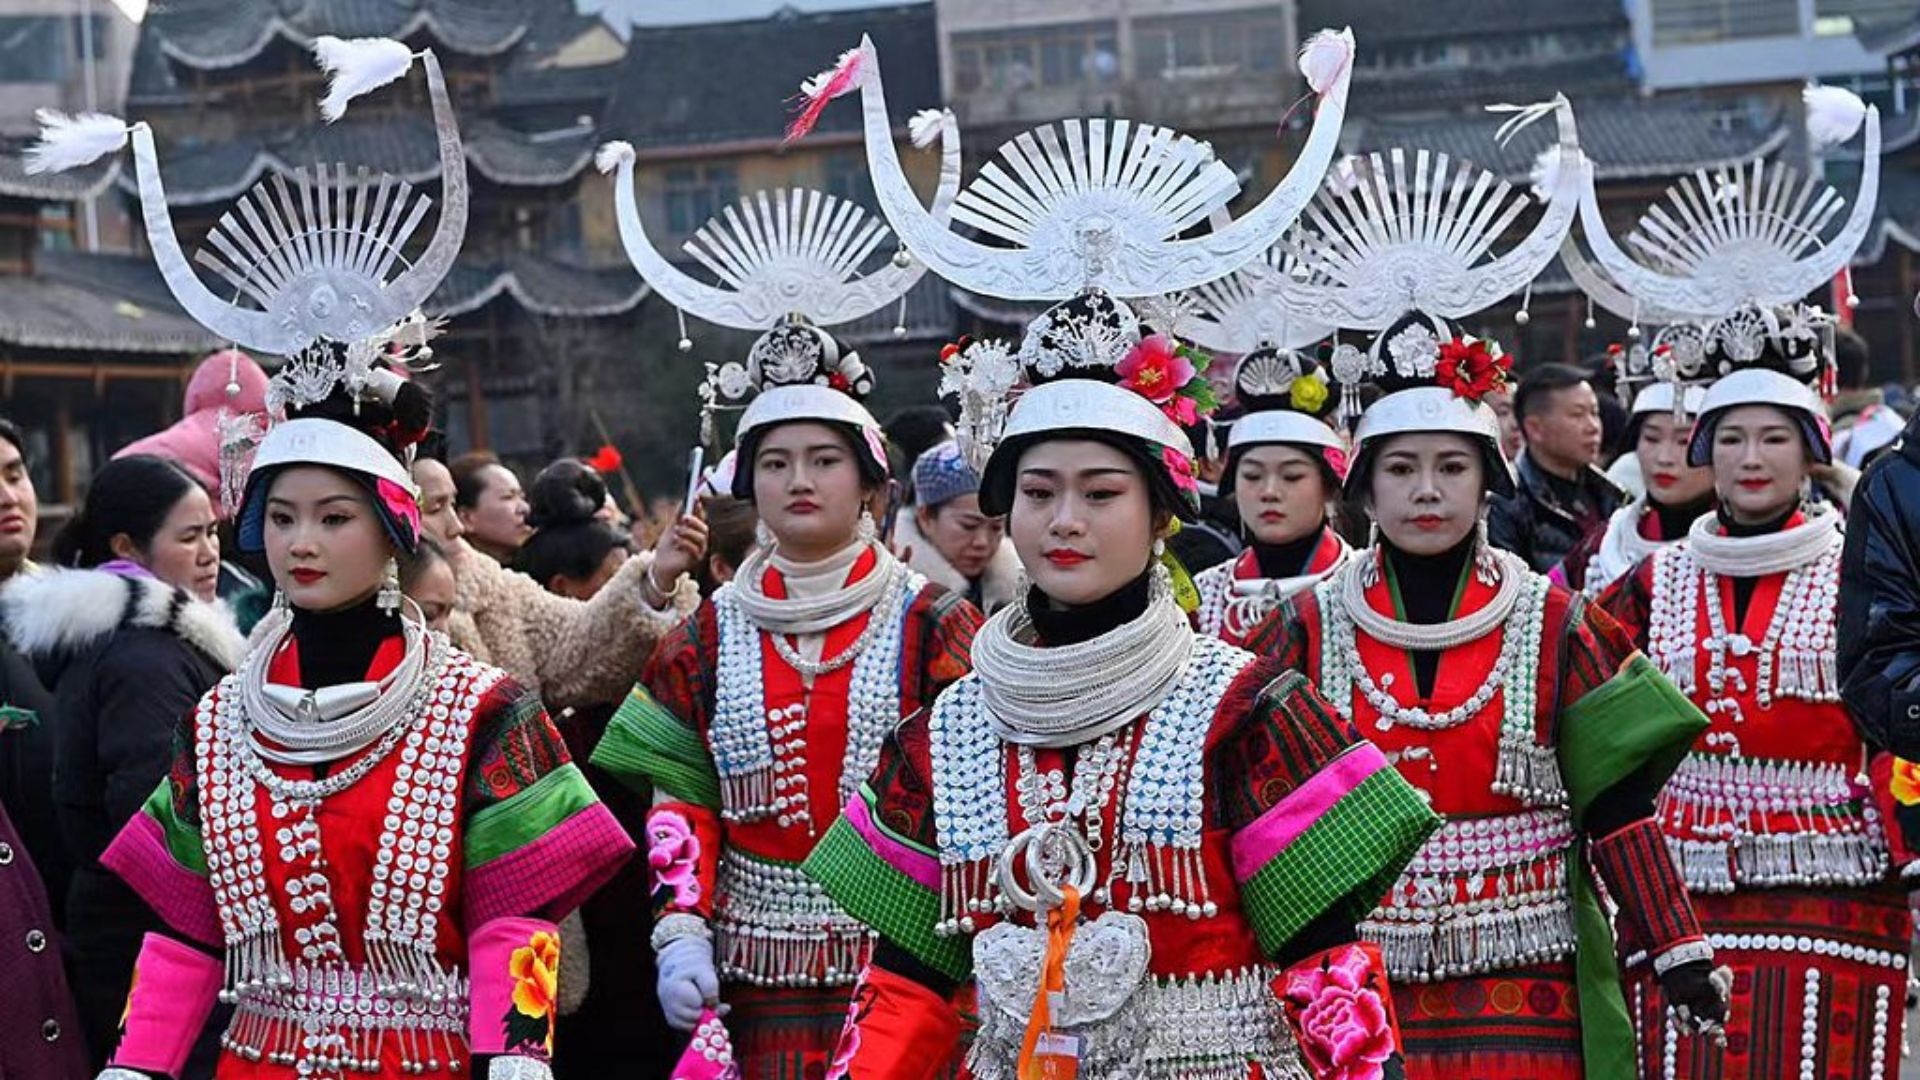 China's colorful history makes it an ideal holiday destination, say tourist officials. /CFP